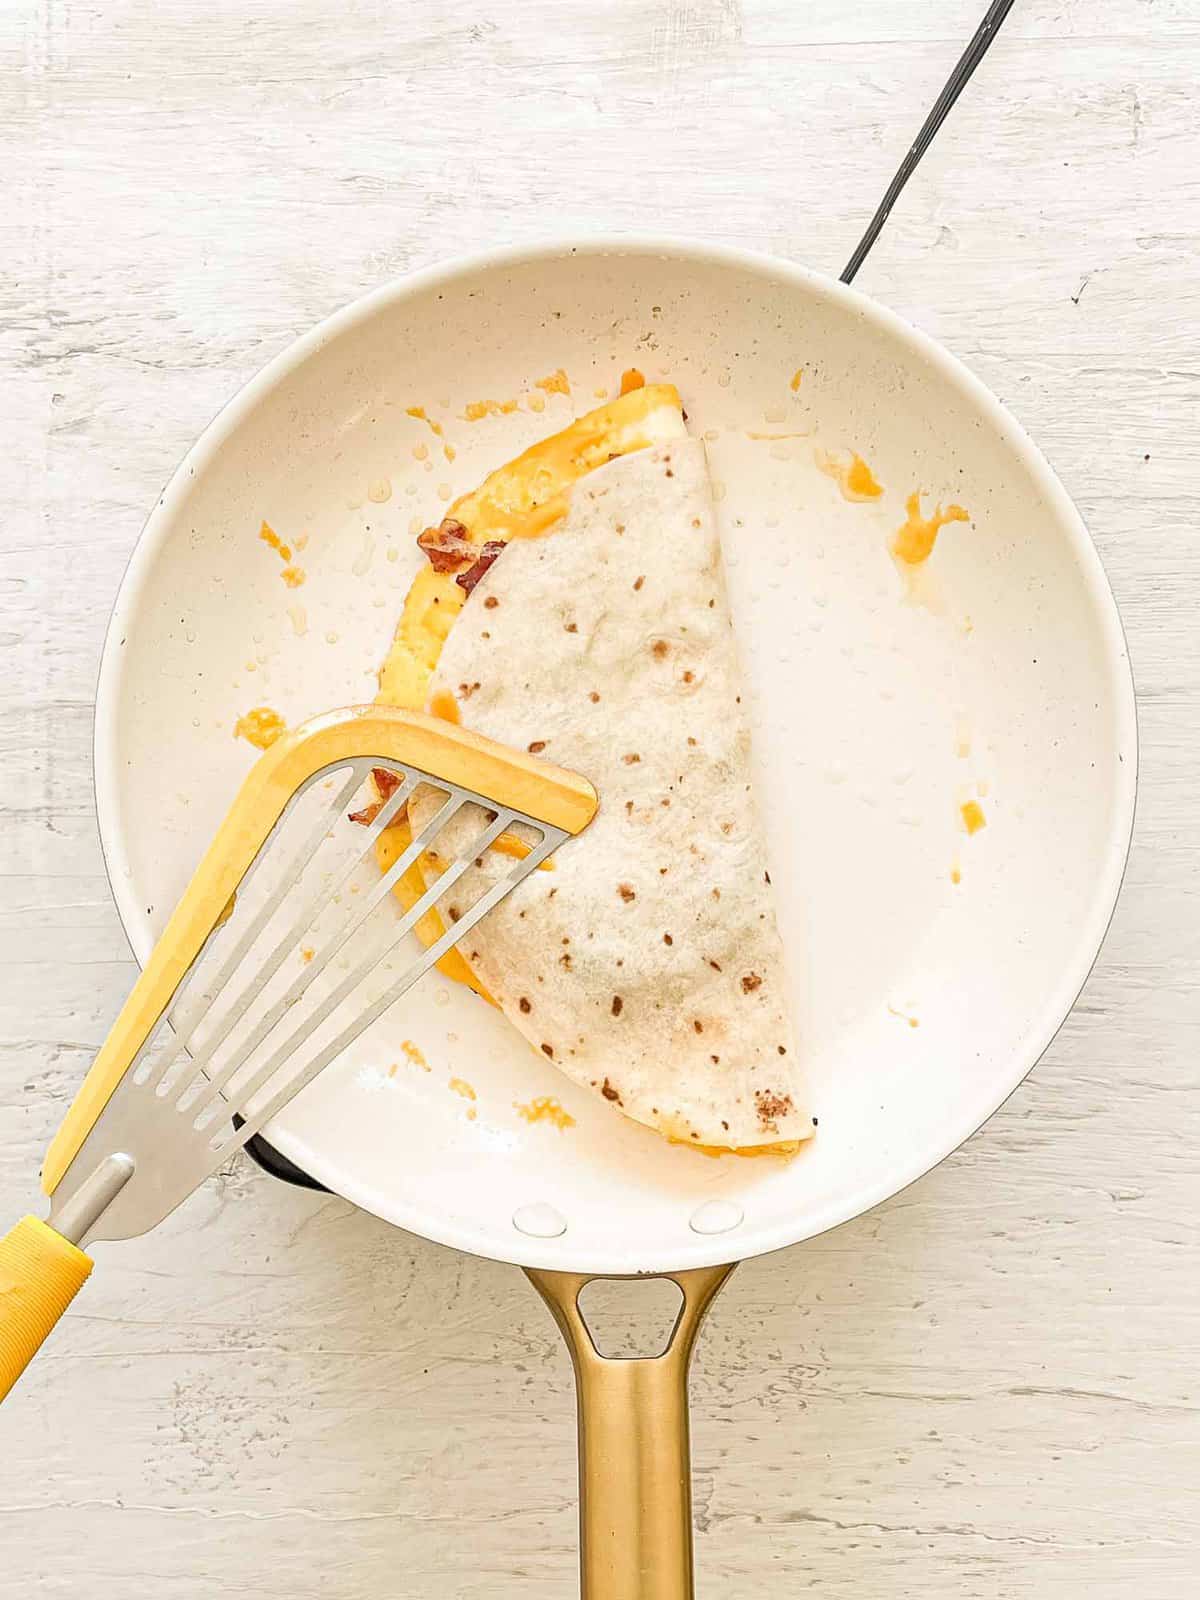 Breakfast Quesadilla being made by folding tortilla in half on to eggs and cheese.